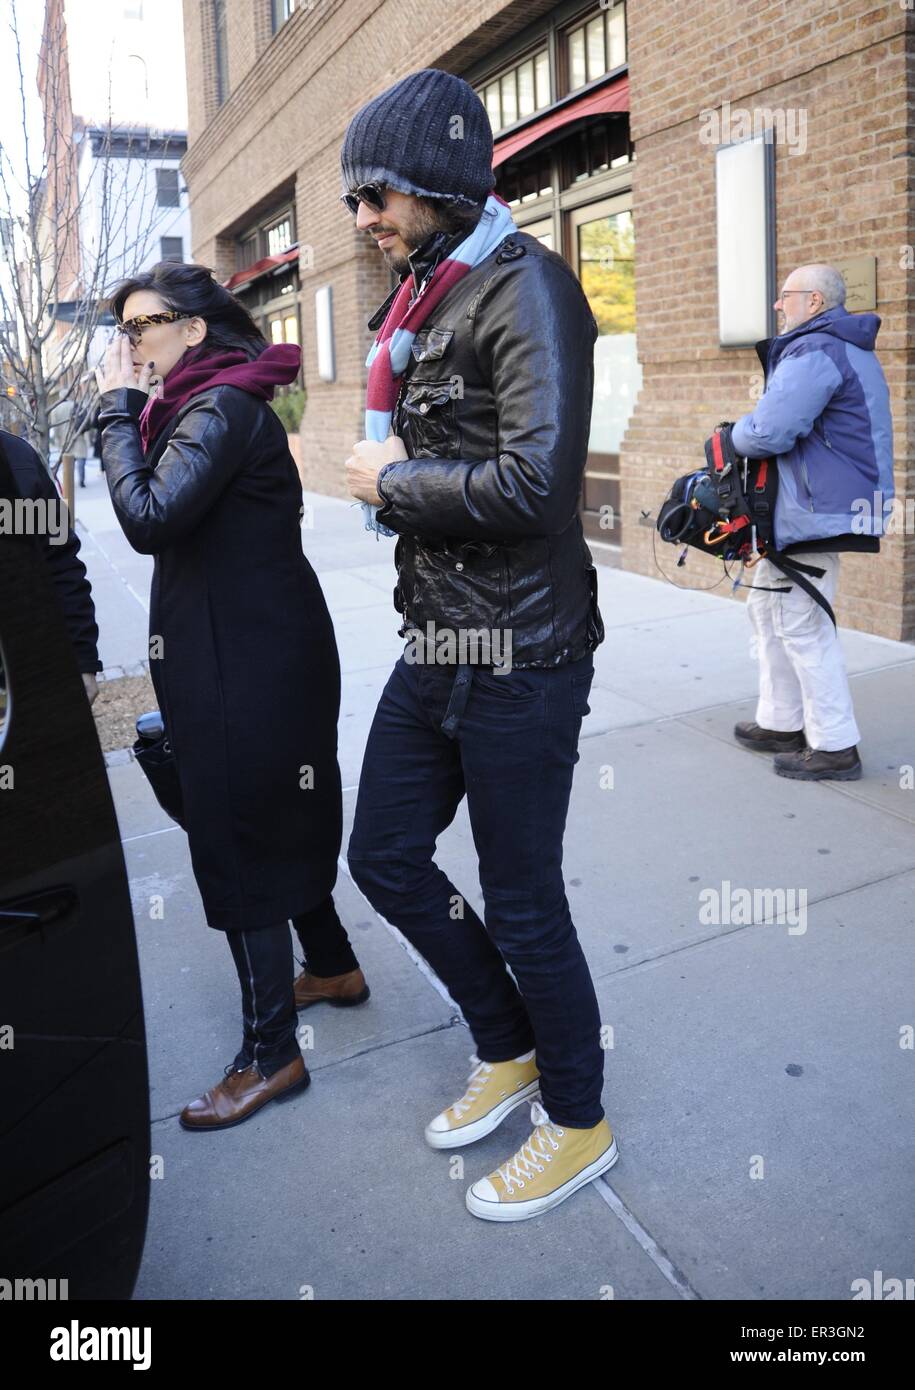 Russell Brand leaves The Greenwich Hotel in Manhattan wearing a claret and blue scarf made in the kit colours of his favourite football team, West Ham United  Featuring: Russell Brand Where: New York City, New York, United States When: 21 Nov 2014 Credit: TNYF/WENN.com Stock Photo